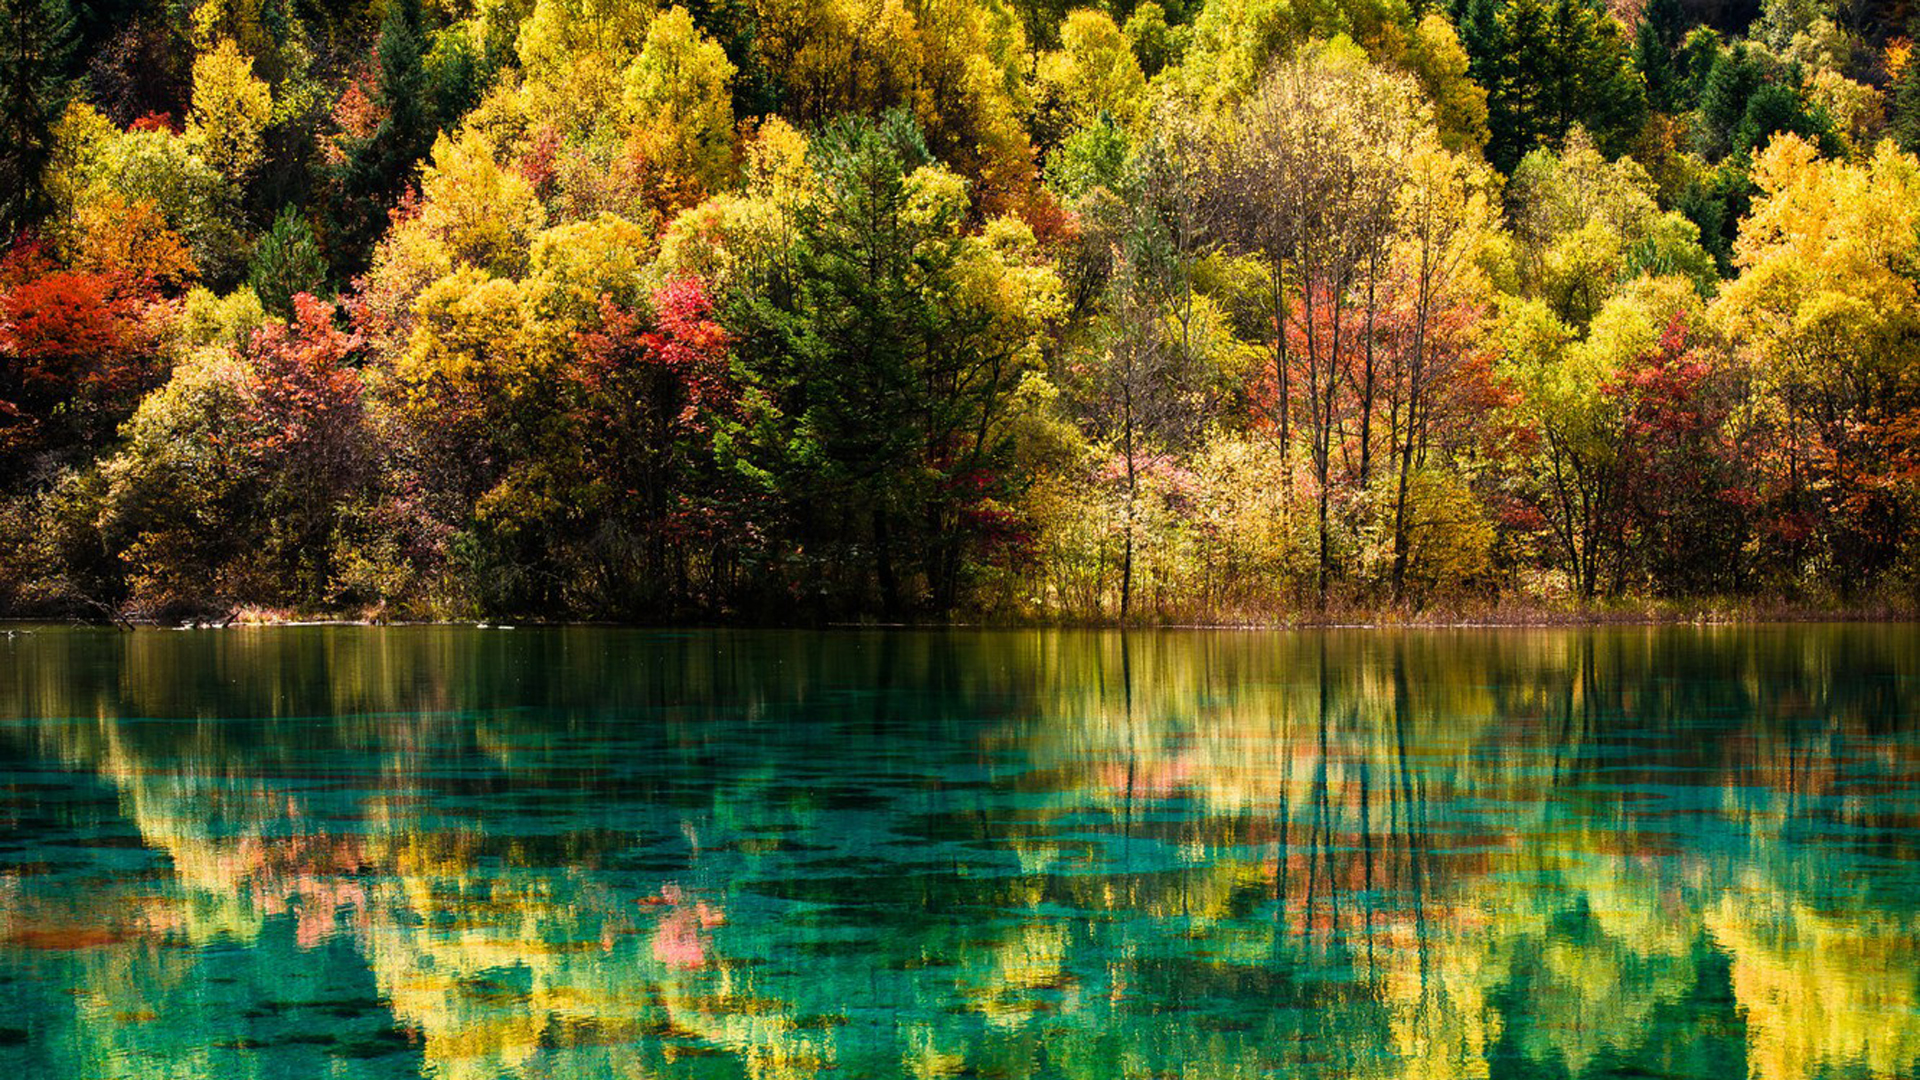 Beautiful Landscape View Of Colorful Autumn Trees Reflection On River During Daytime 2K Nature